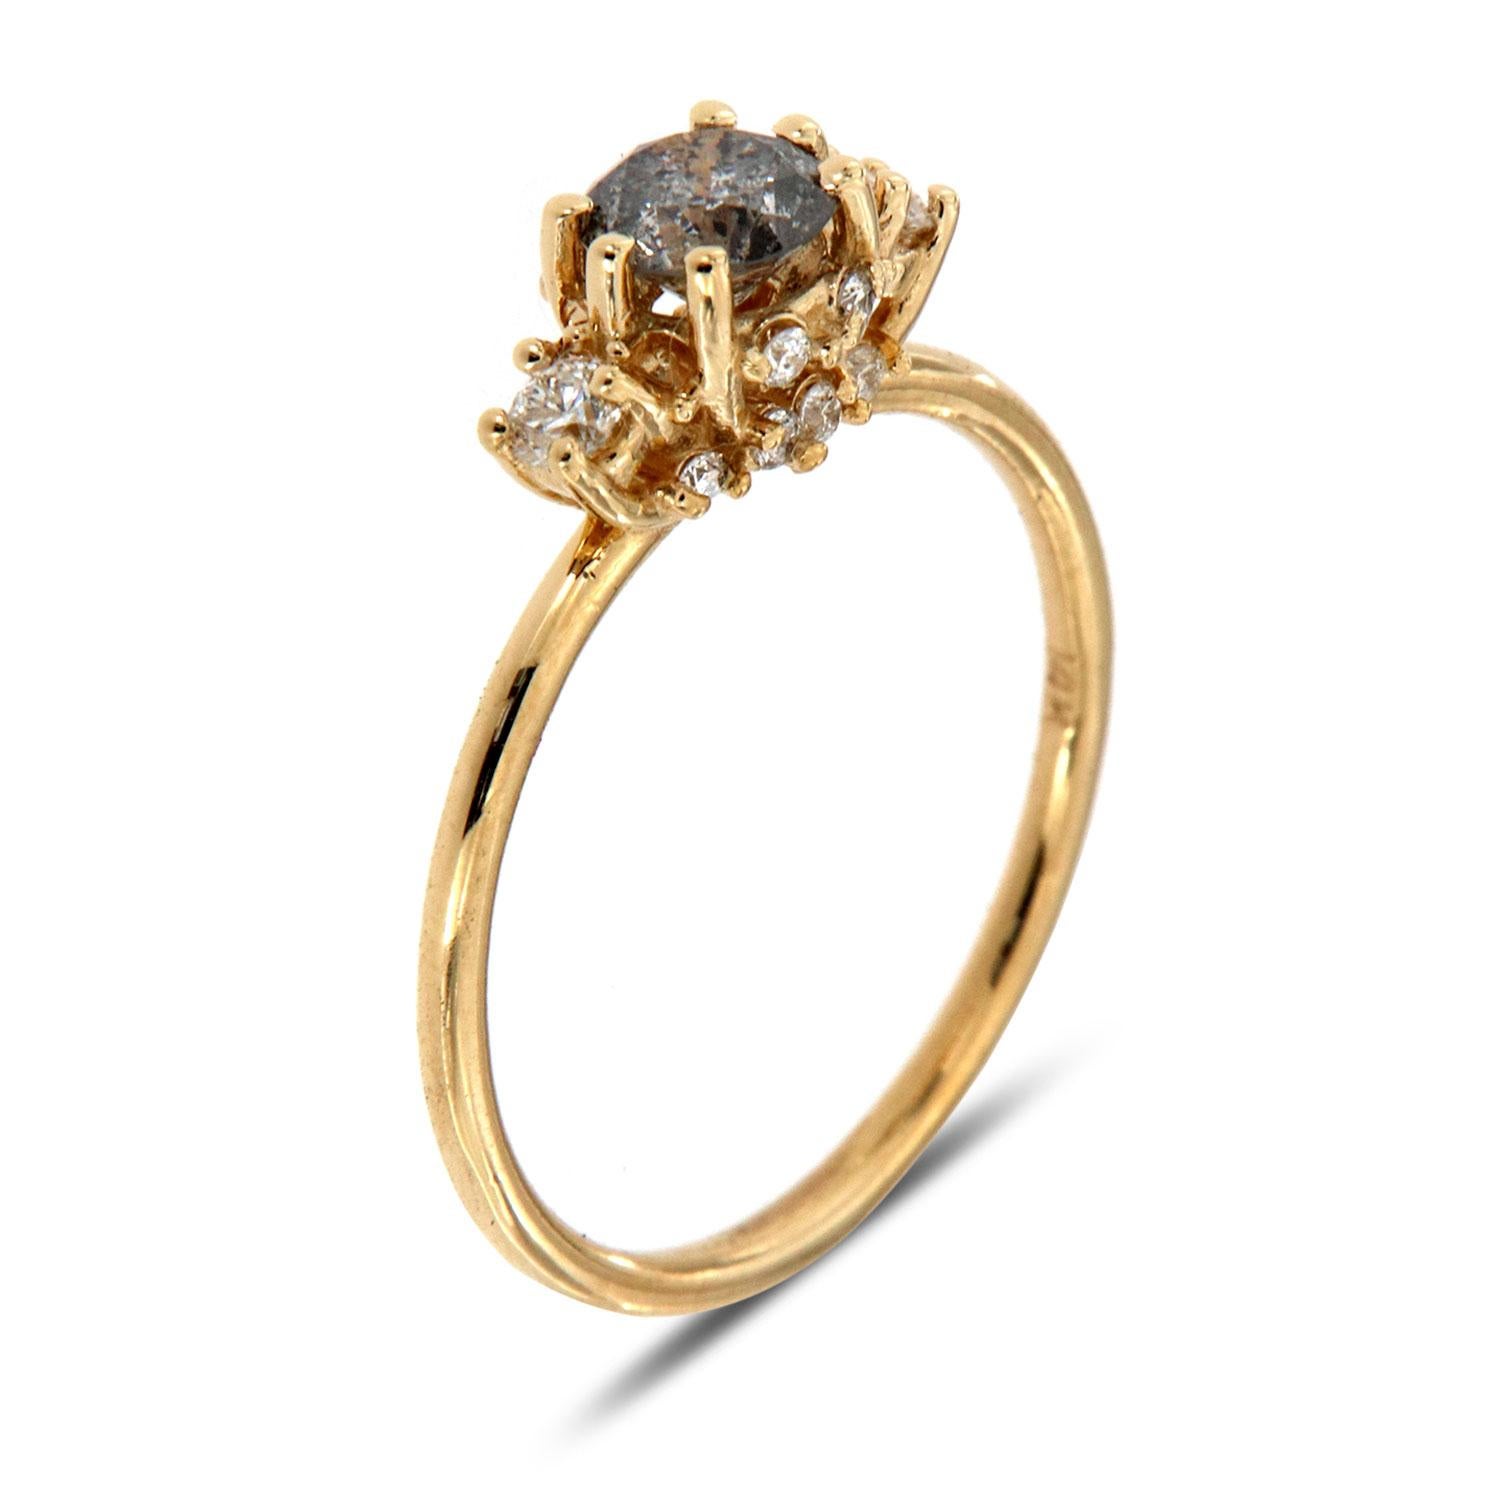 This petite ring is from our Vale collection is impressive in its Earthy & Organic appeal. It features a 0.46 -carat Salt and Pepper round diamond set in six tiny prongs and flanked by two perfectly Round-Sha[aped diamonds. Eight (8) round diamonds